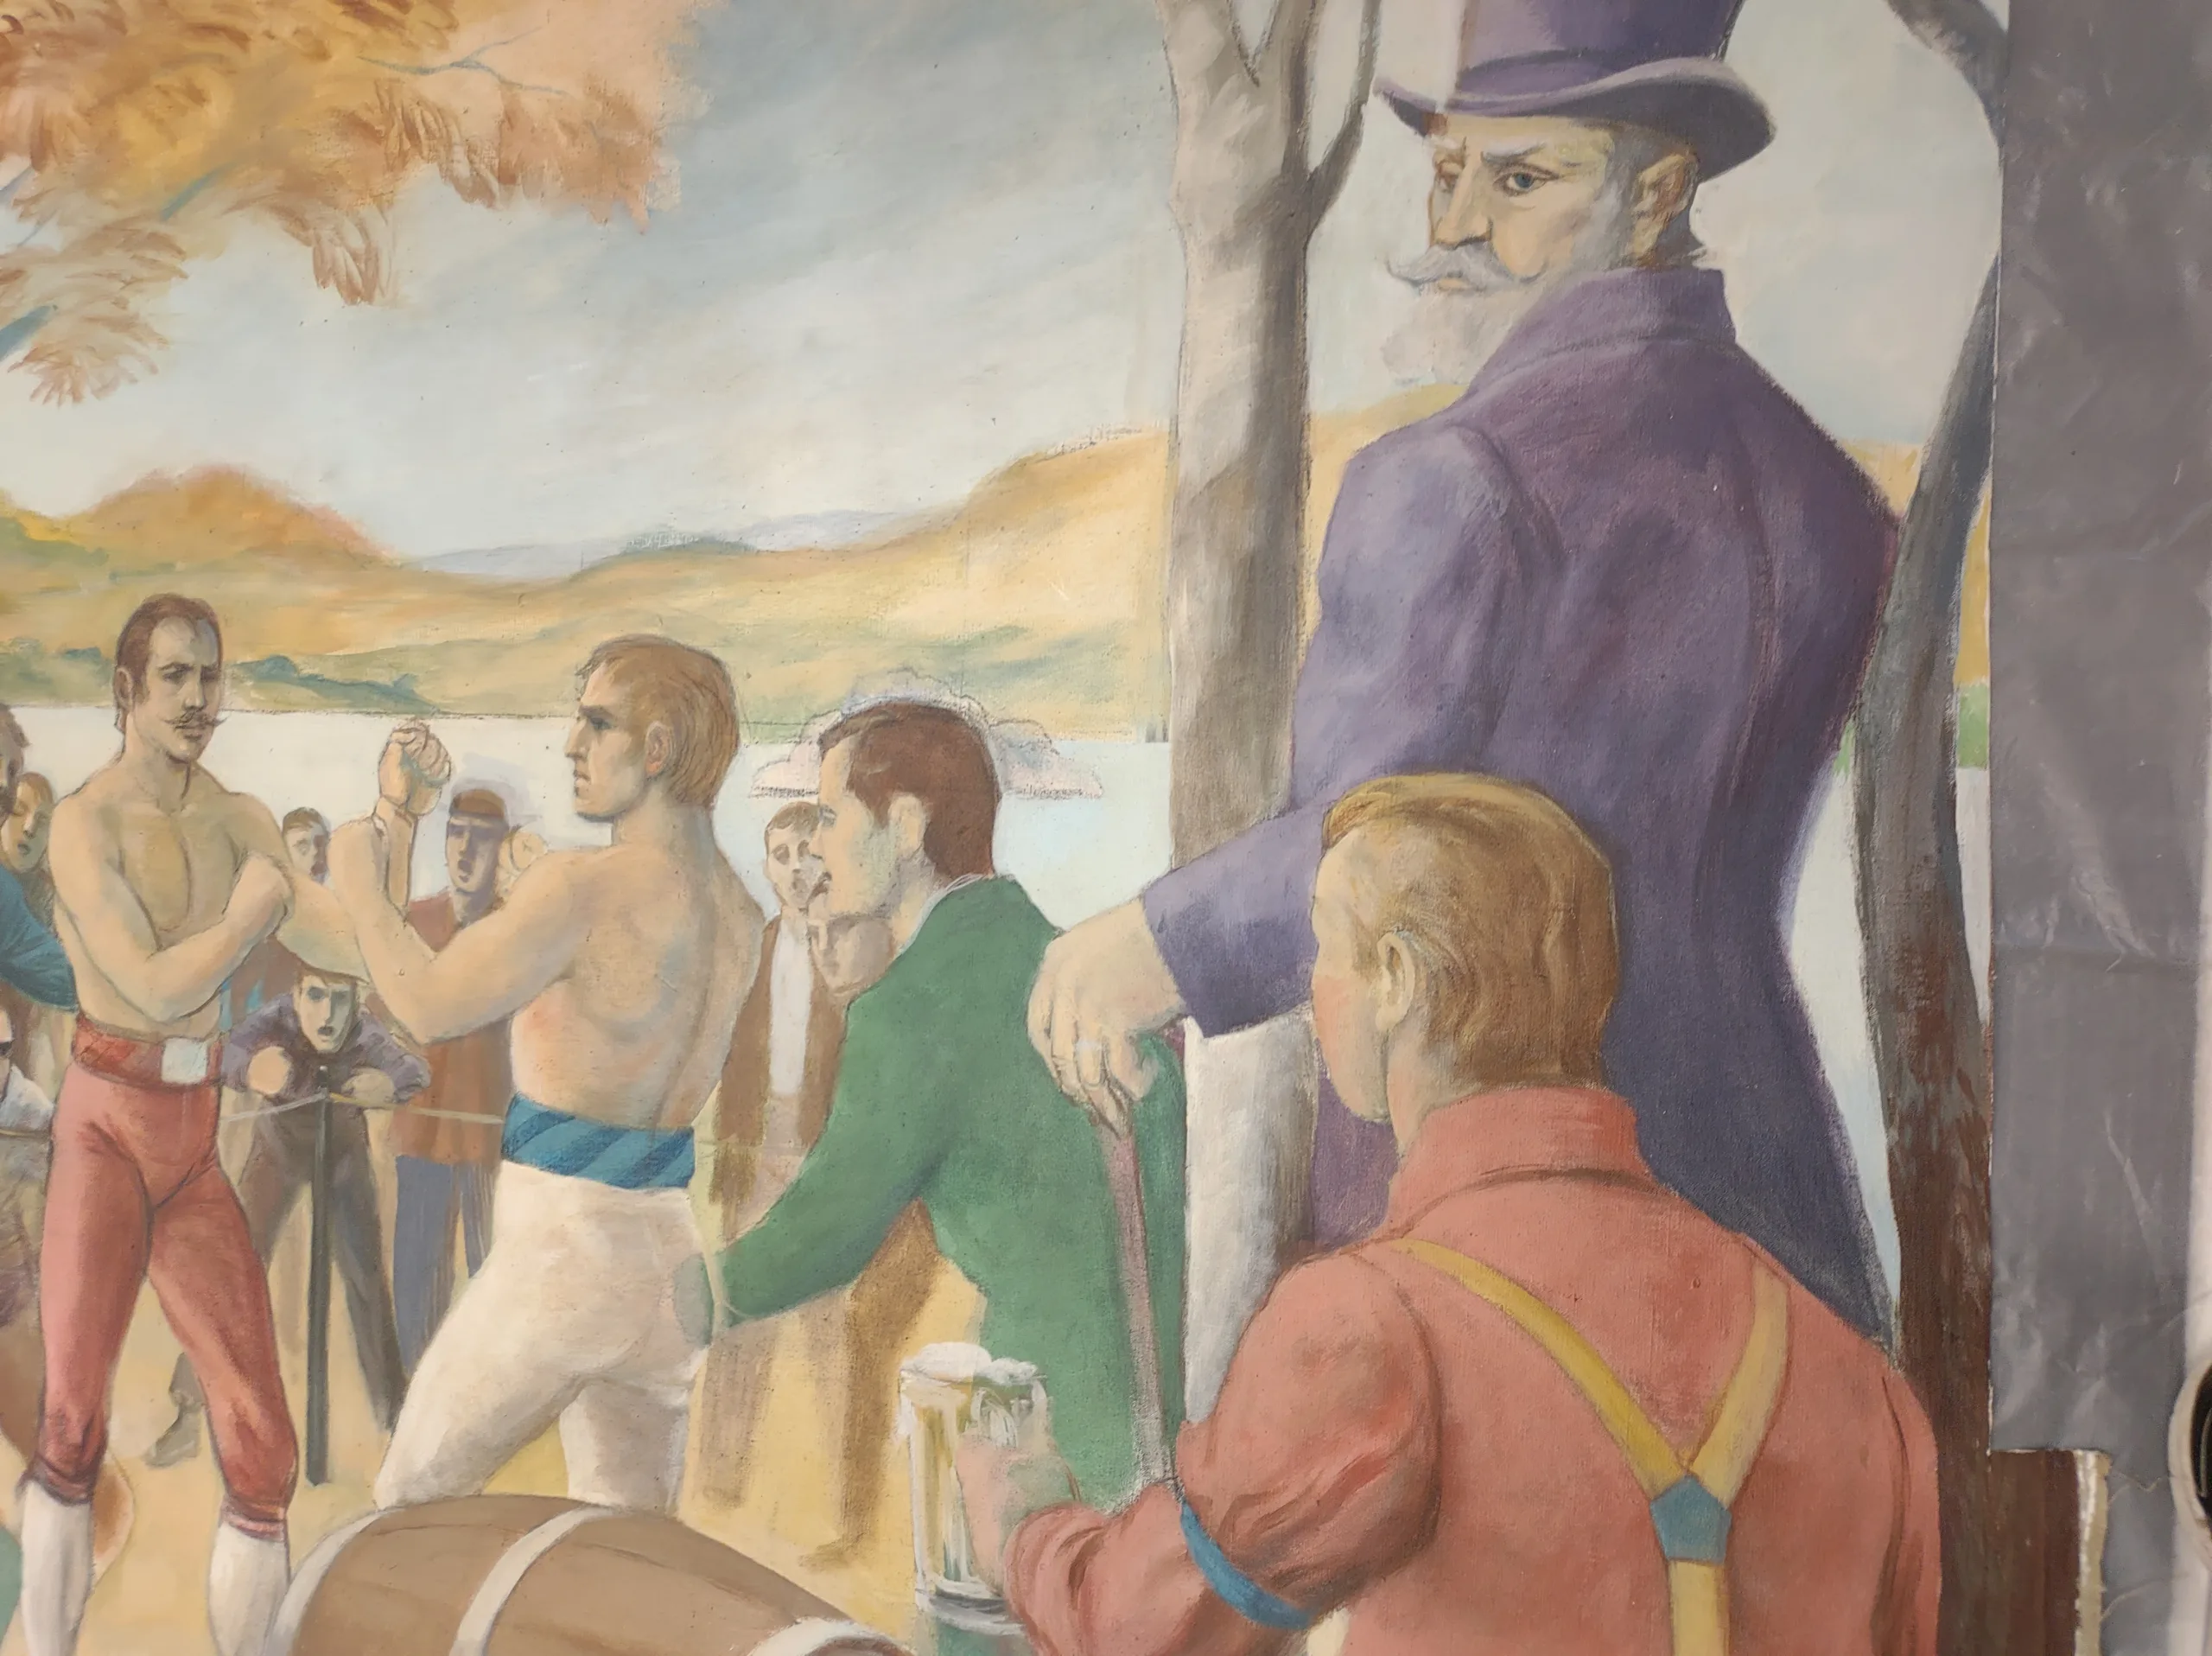 Mural depicting a bare-knuckle boxing match in the late 1800s